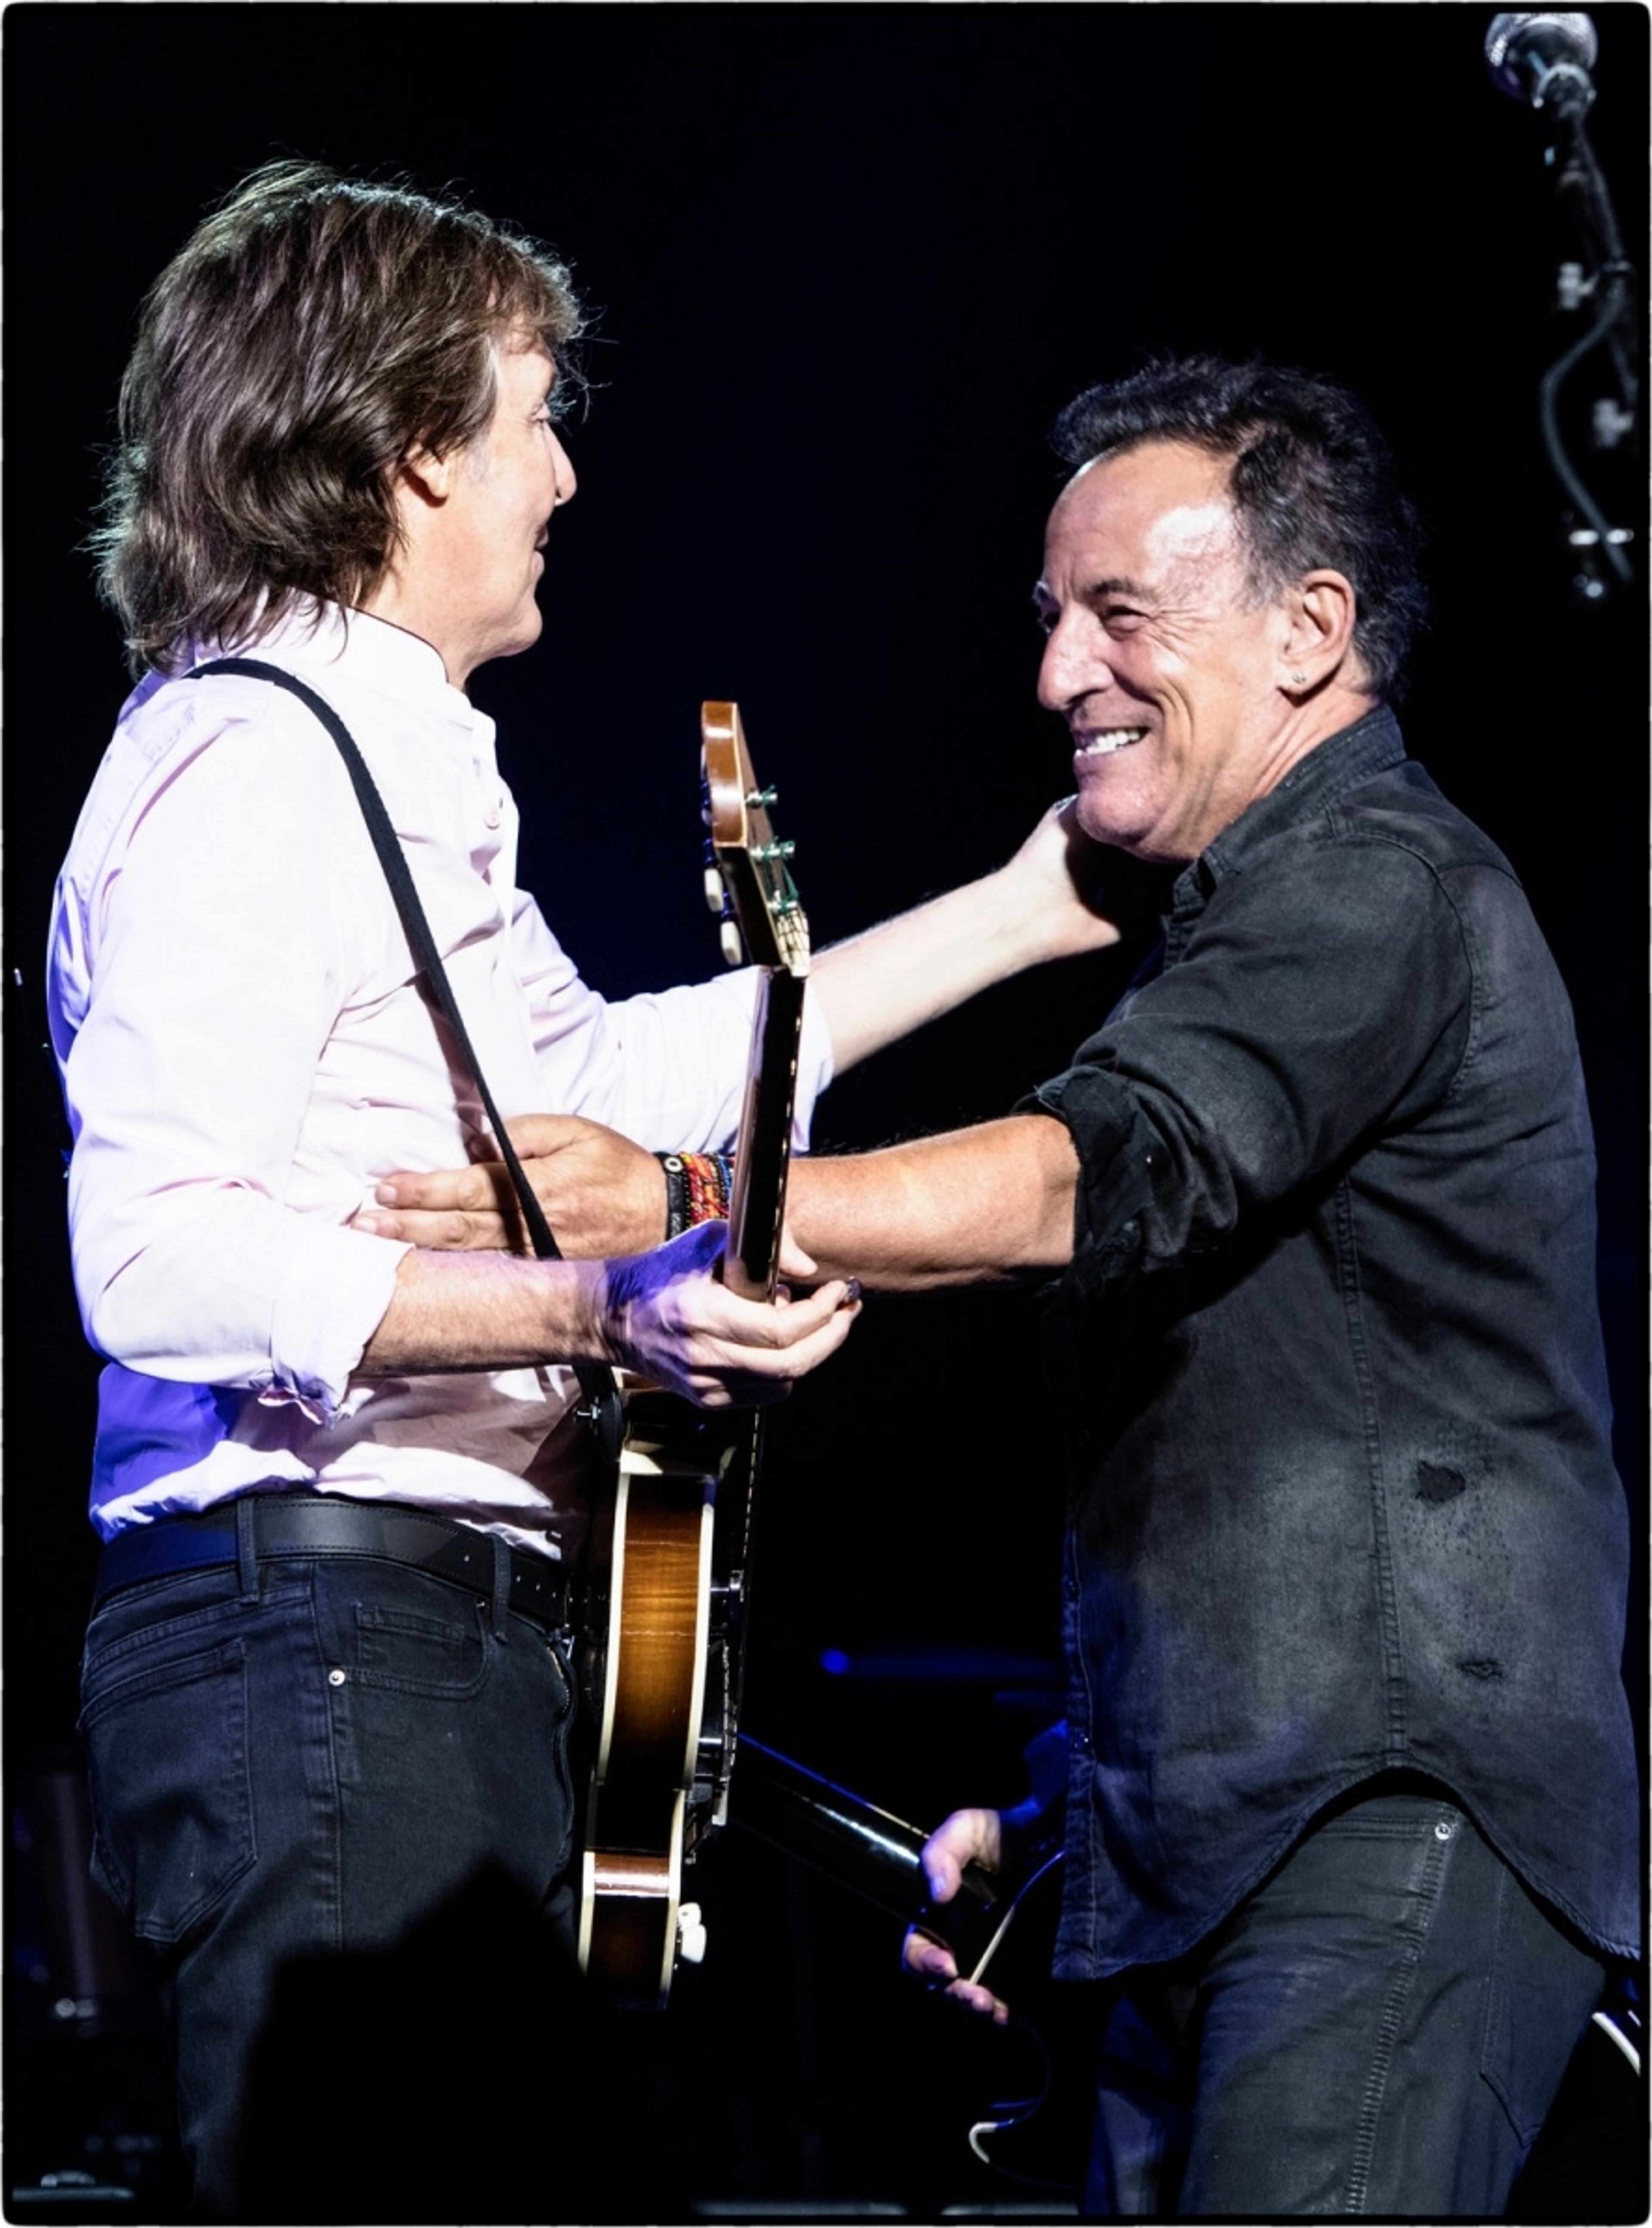 Bruce Springsteen was Paul’s surprise guest at the Madison Square Garden show in September 2017